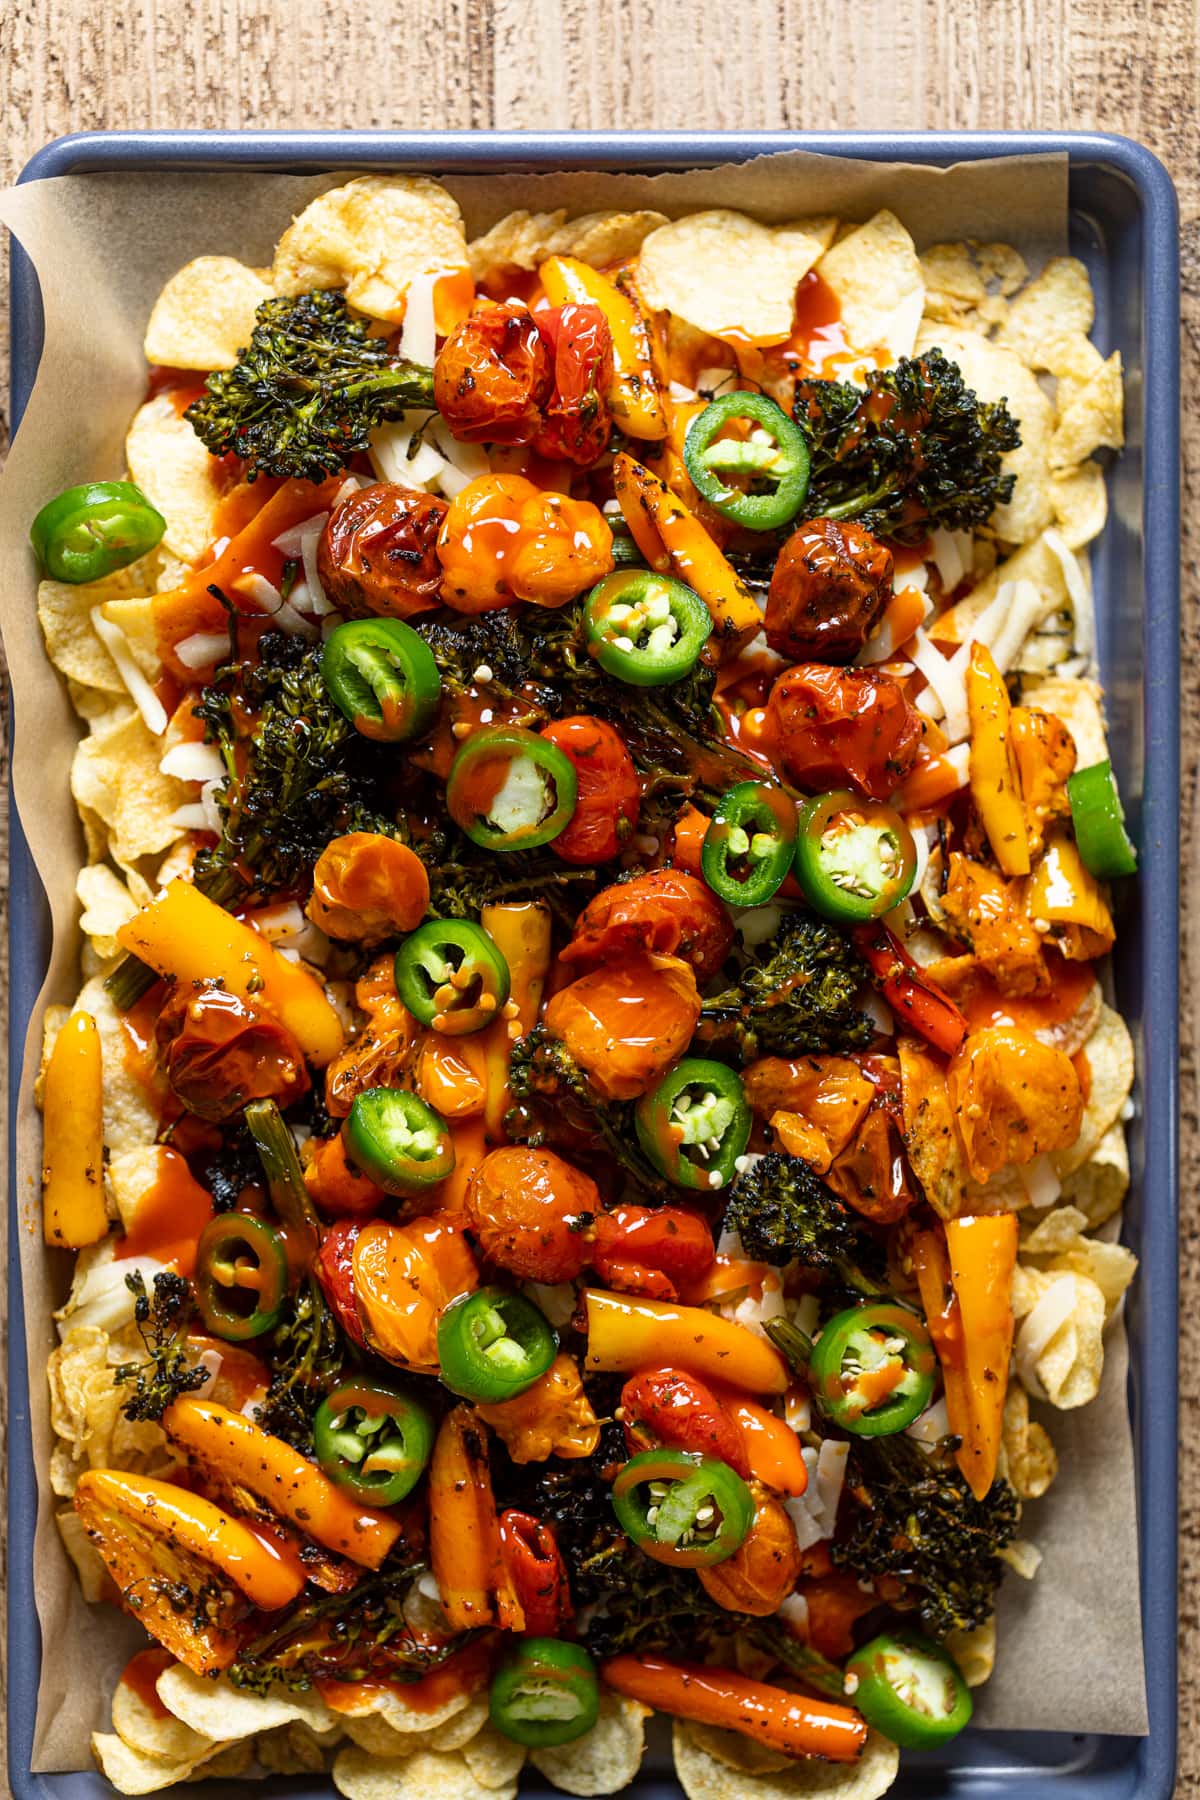 Kettle chips, red sauce, shredded cheese, and roasted vegetables topped jalapeno slices